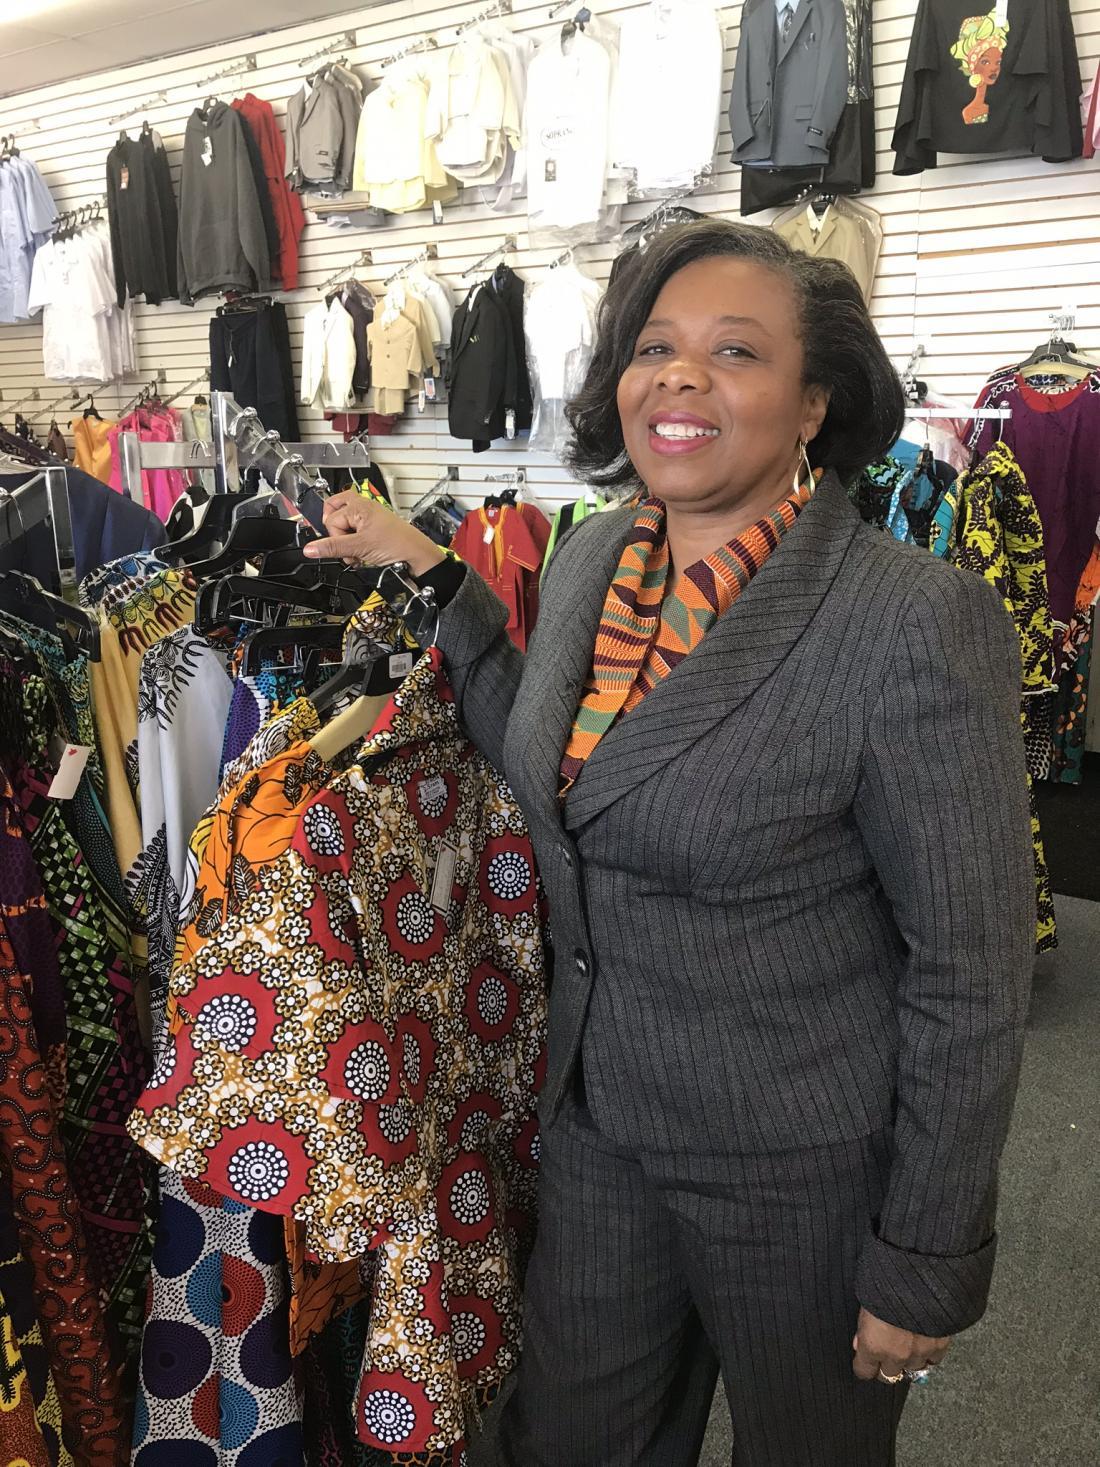 Nancy Wheeler has owned and operated World Fashions for 27 years.